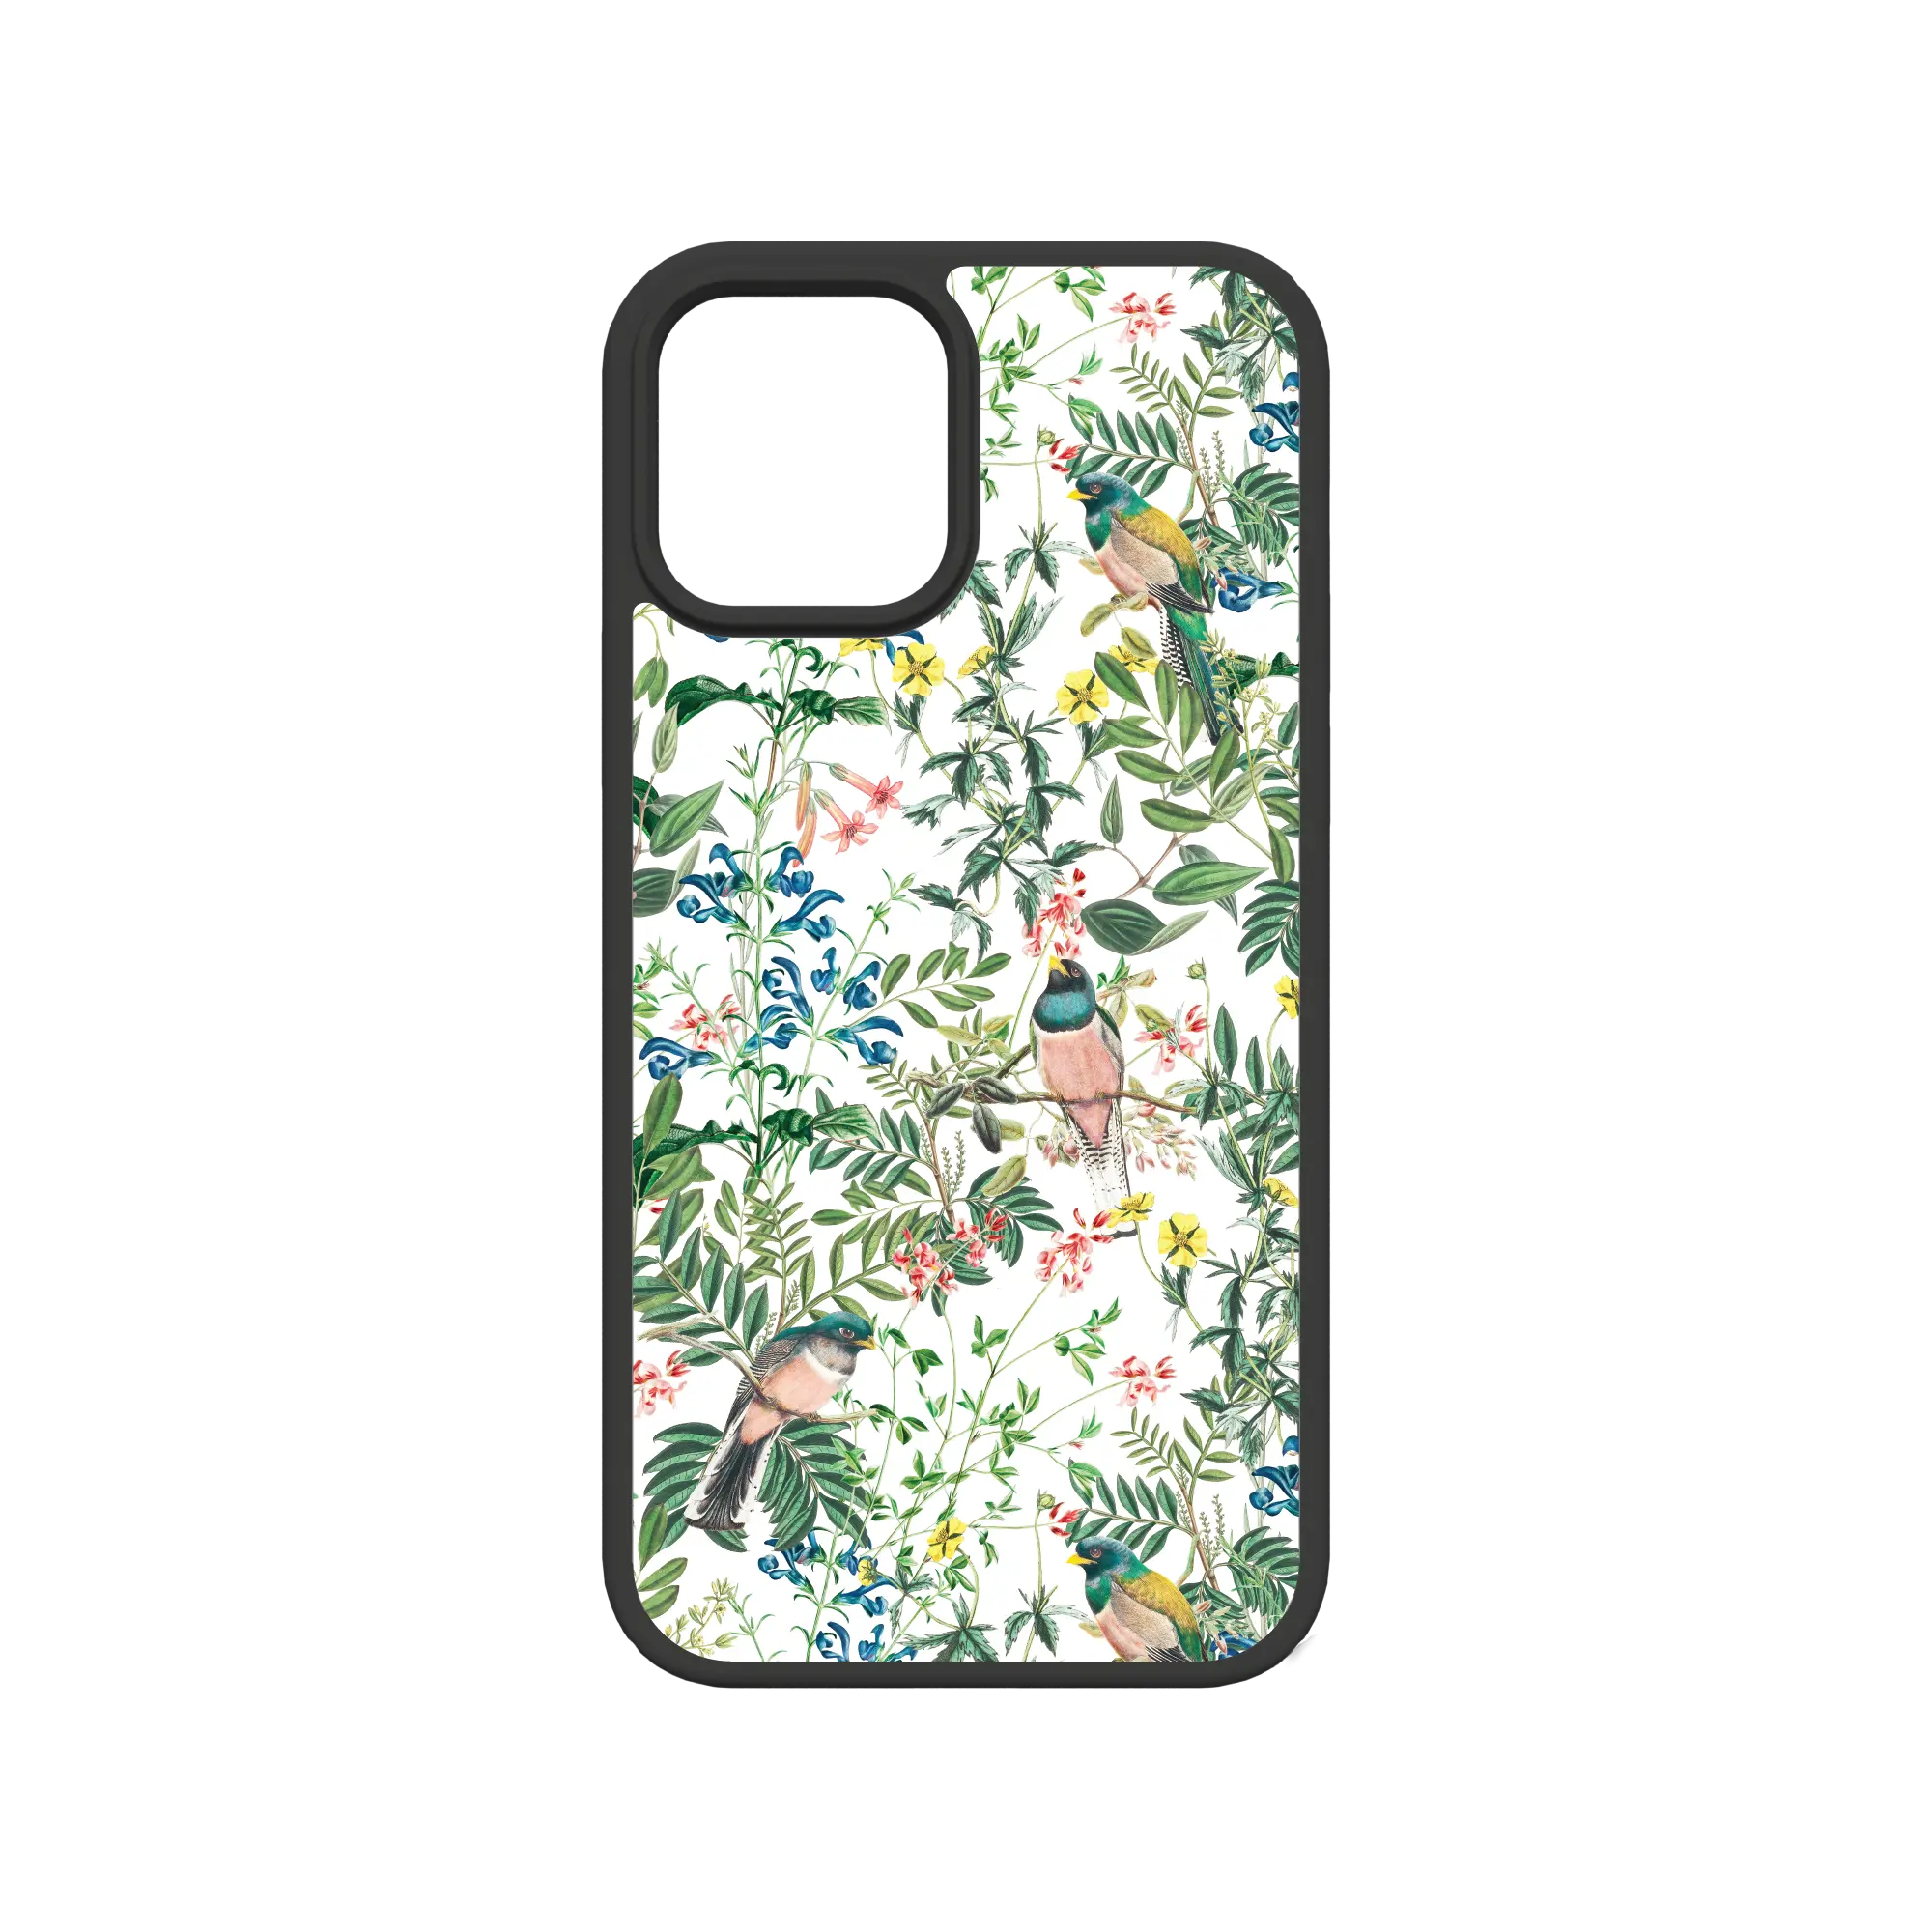 Apple-iPhone-12-12-Pro-Crystal-Clear Oasis Blossom | Protective MagSafe Floral Bird Case | Birds and Bees Series for Apple iPhone 12 Series cellhelmet cellhelmet